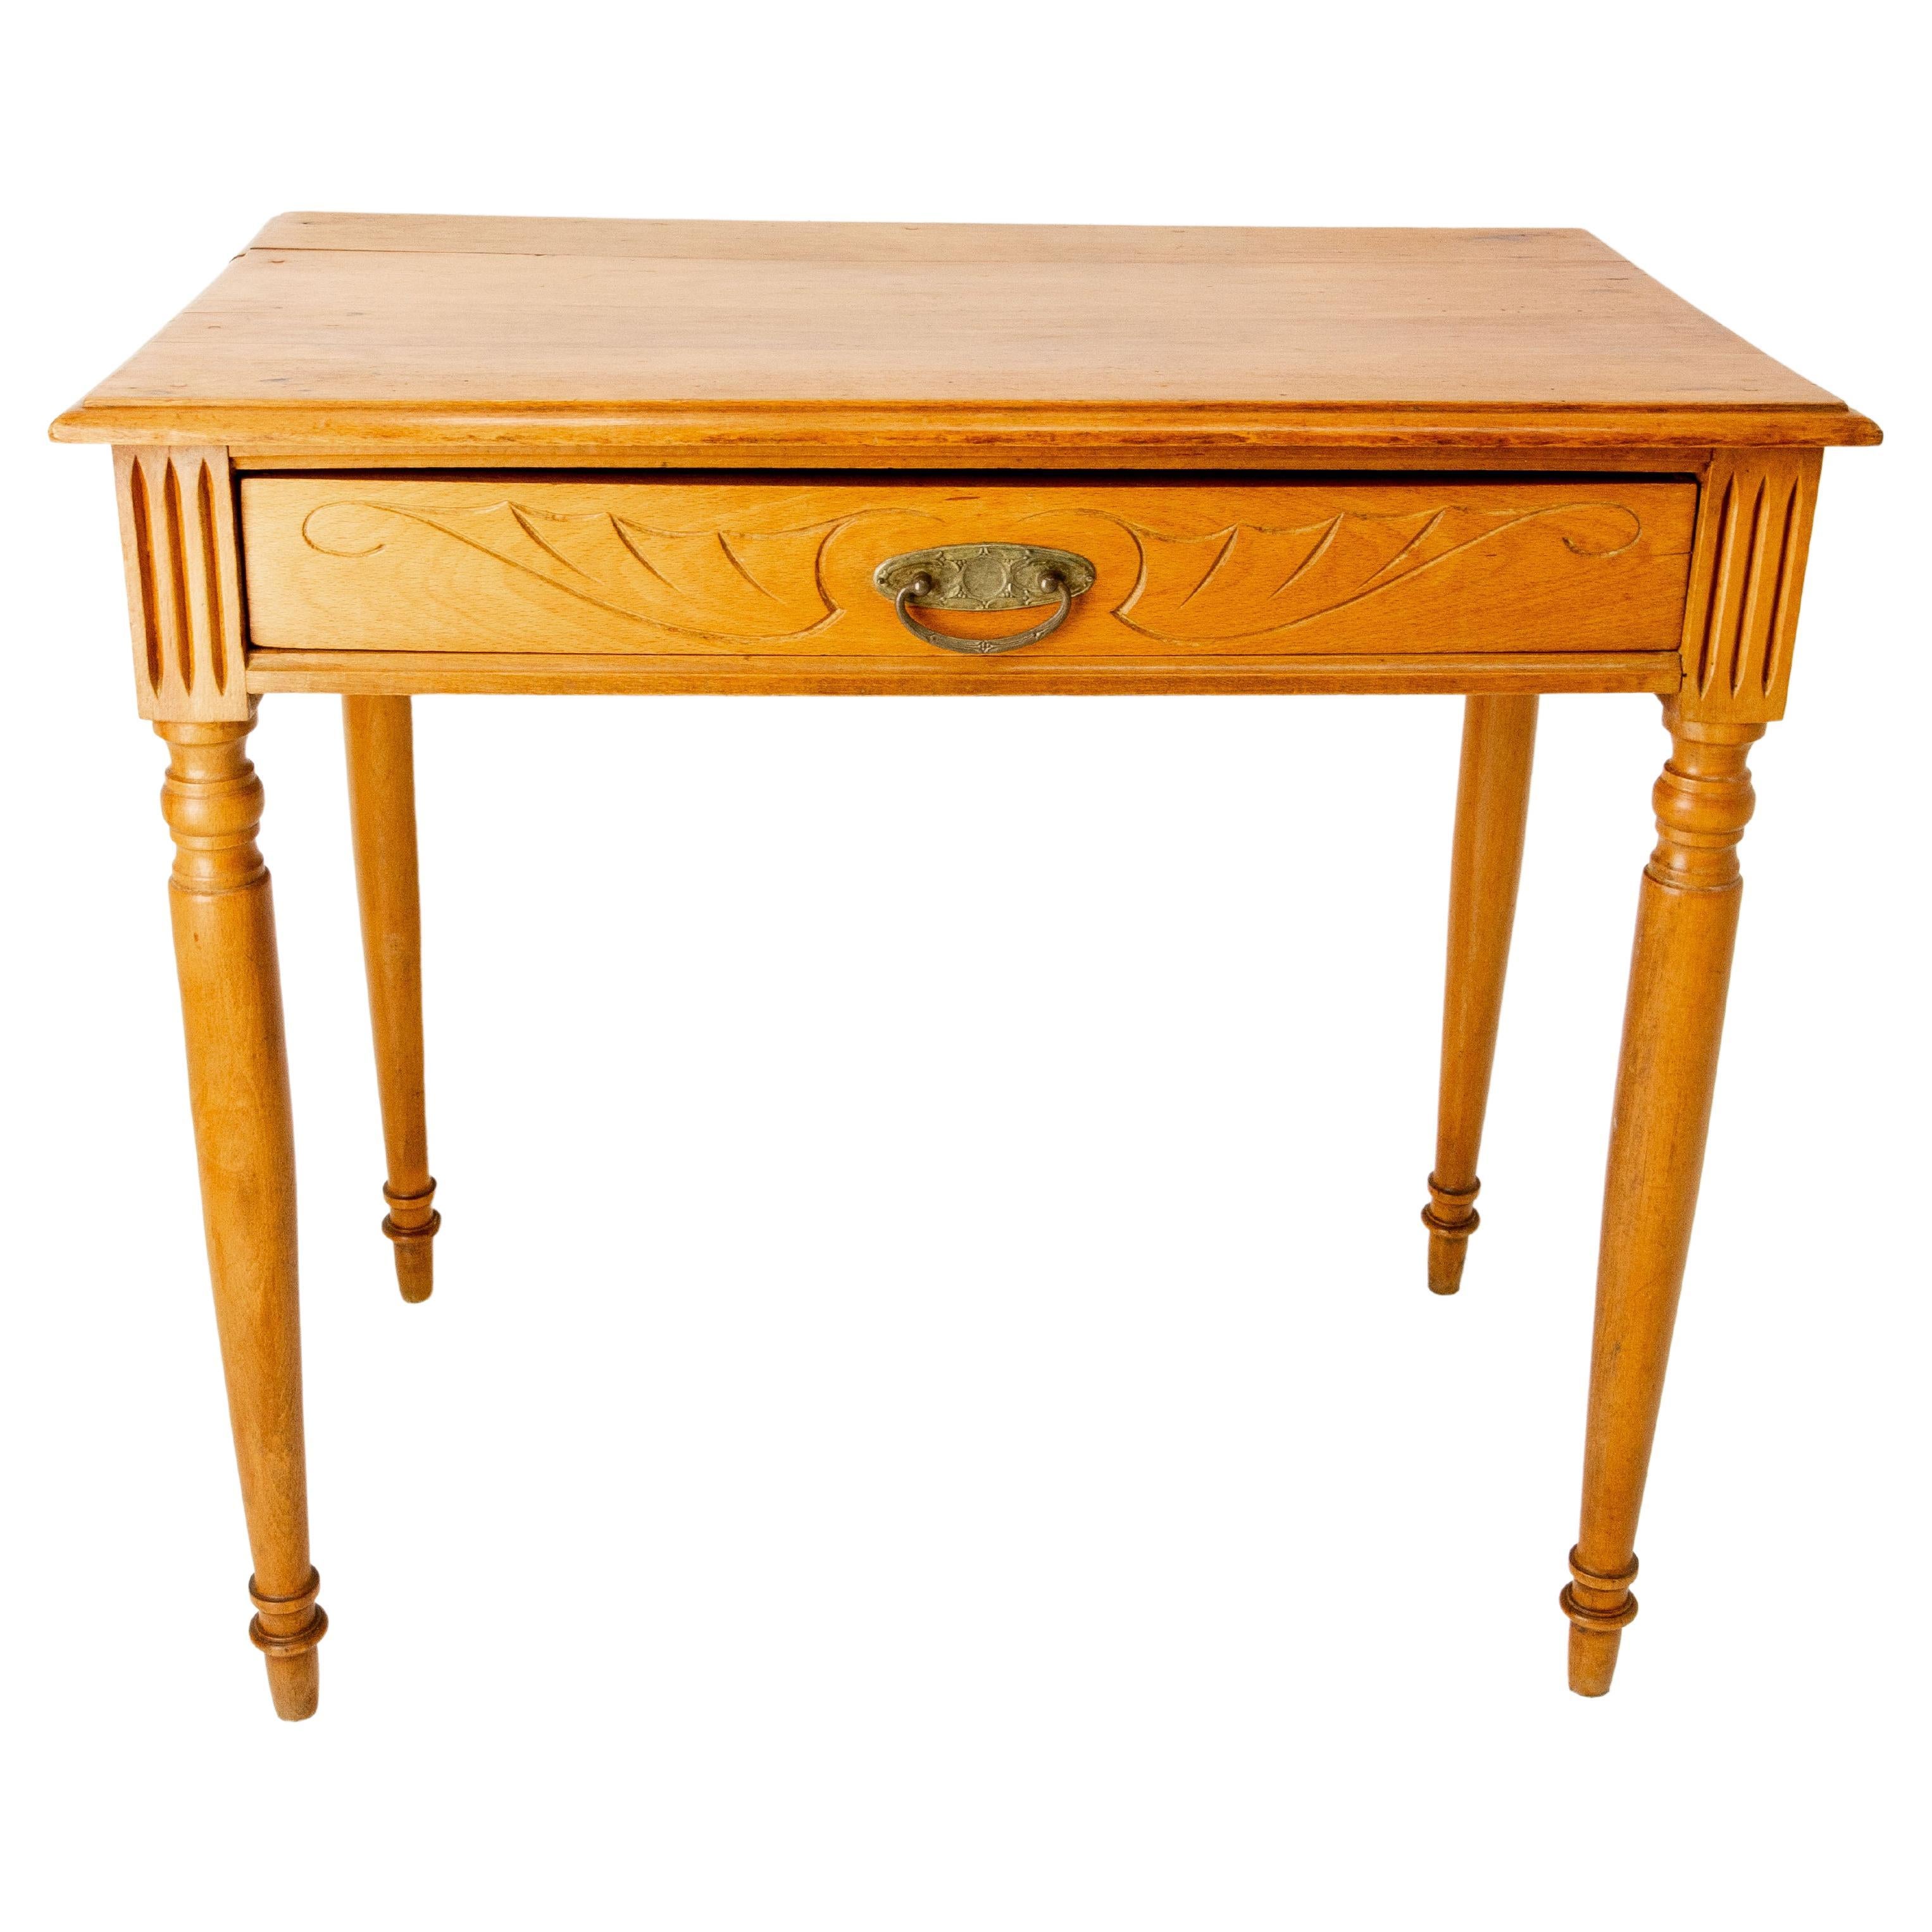 French Art Nouveau Beech Writing Table, Desk or Side Table, circa 1900